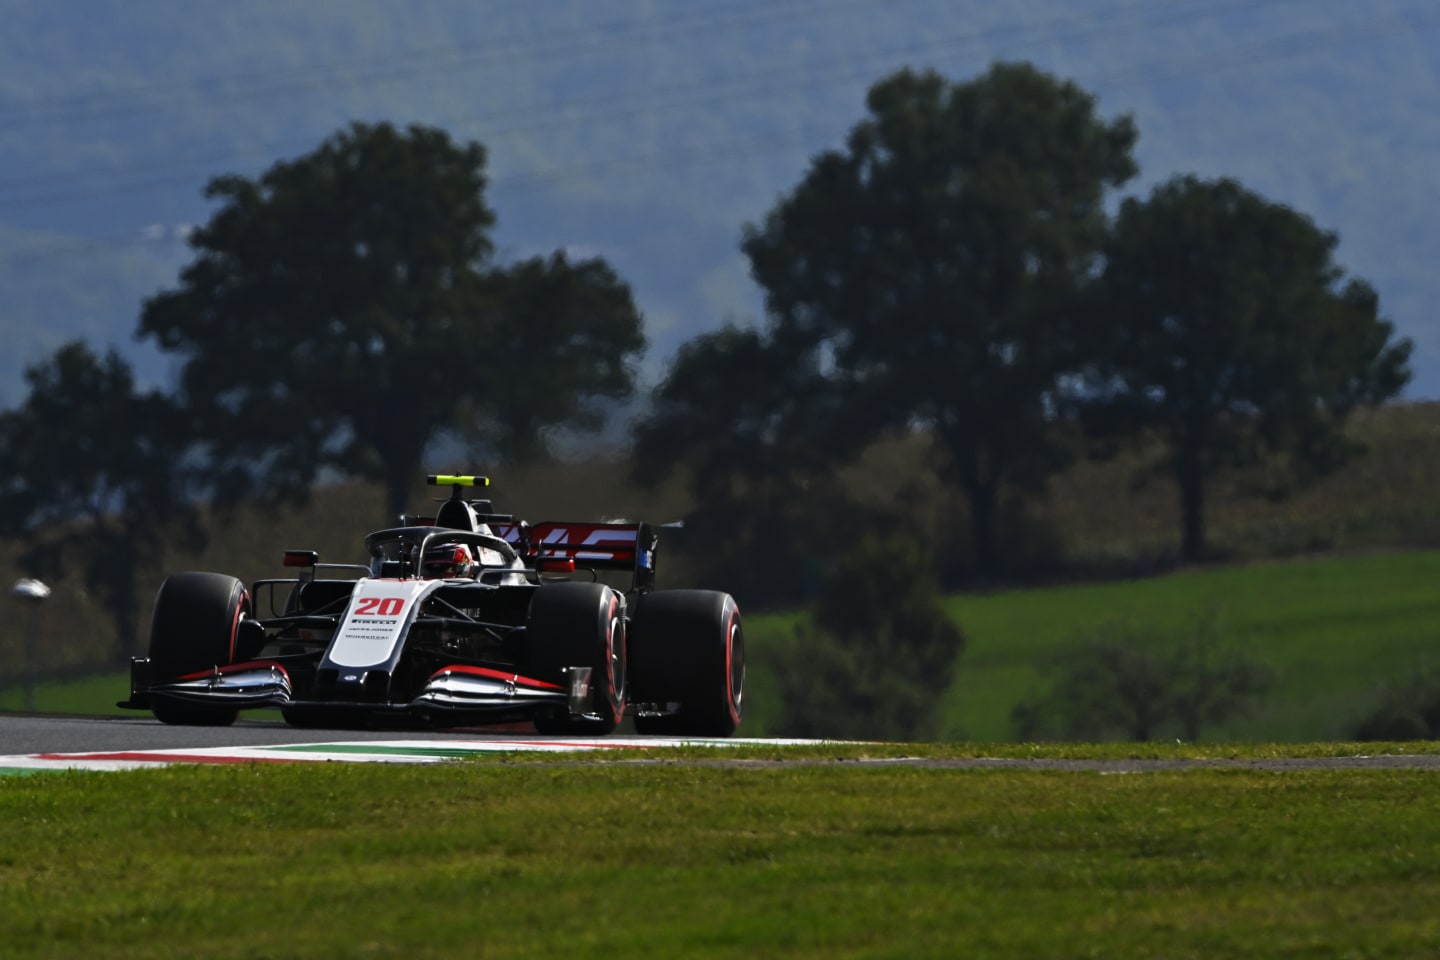 SCARPERIA, ITALY - SEPTEMBER 11: Kevin Magnussen of Denmark driving the (20) Haas F1 Team VF-20 Ferrari on track during practice ahead of the F1 Grand Prix of Tuscany at Mugello Circuit on September 11, 2020 in Scarperia, Italy. (Photo by Rudy Carezzevoli/Getty Images)